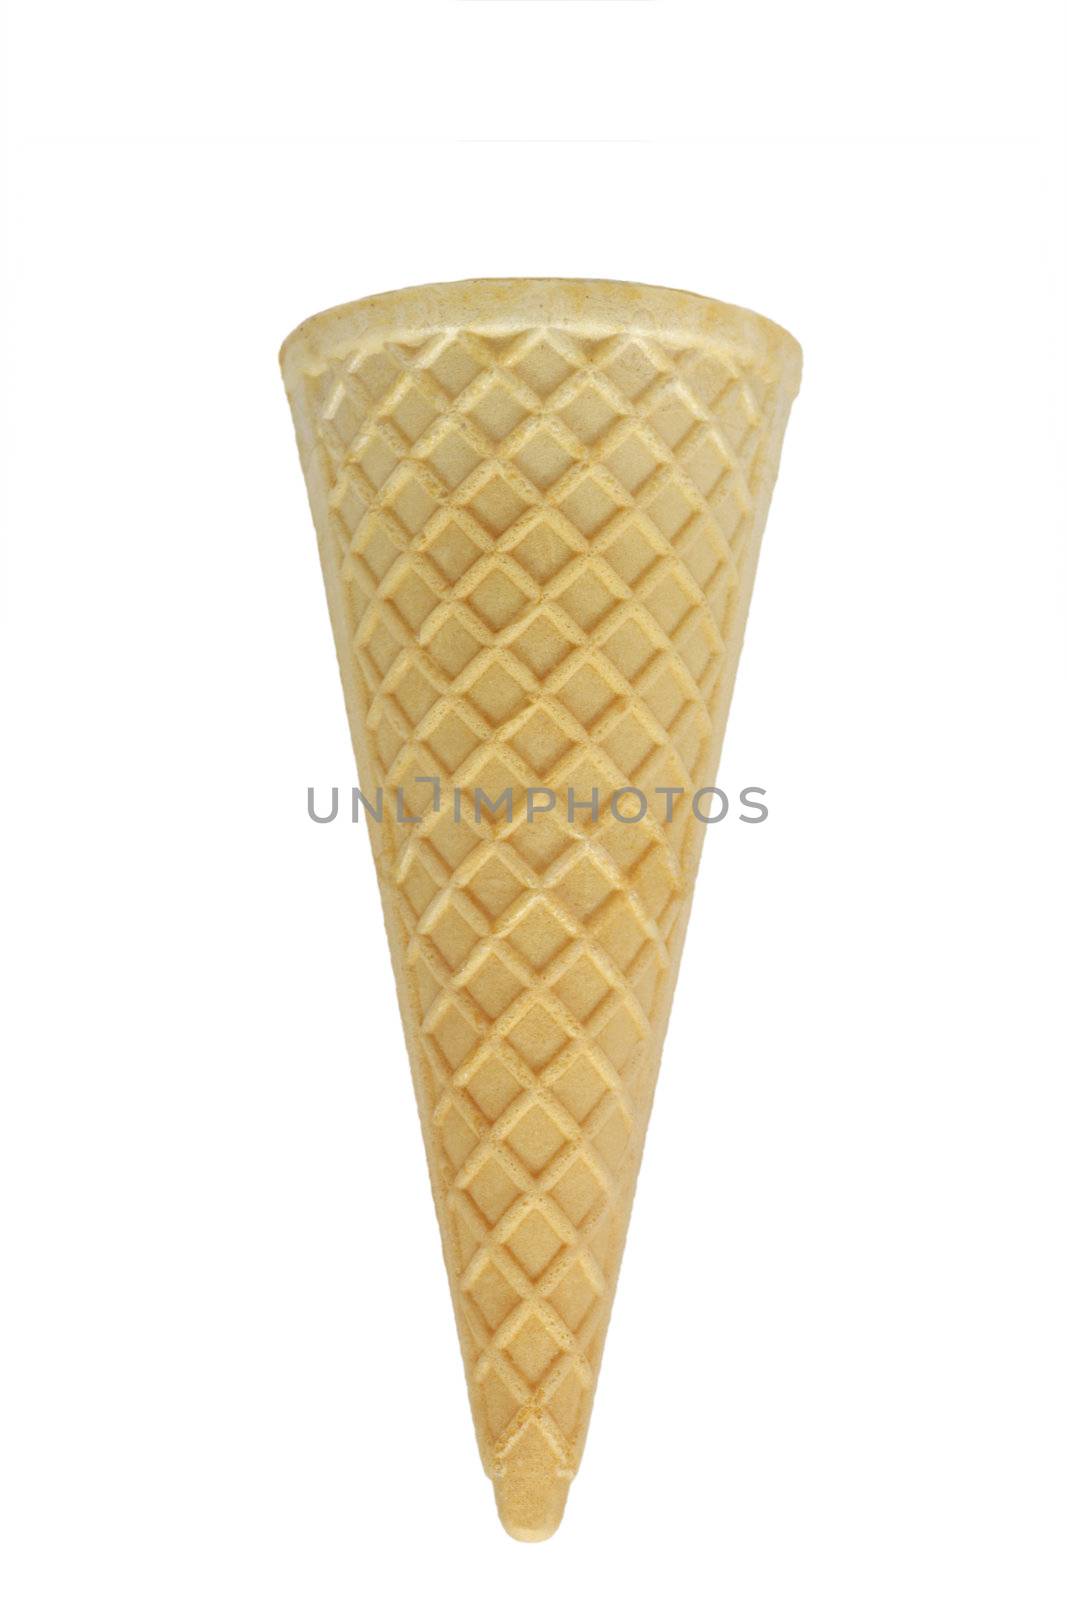 Ice-cream wafer cup - isolated on white background